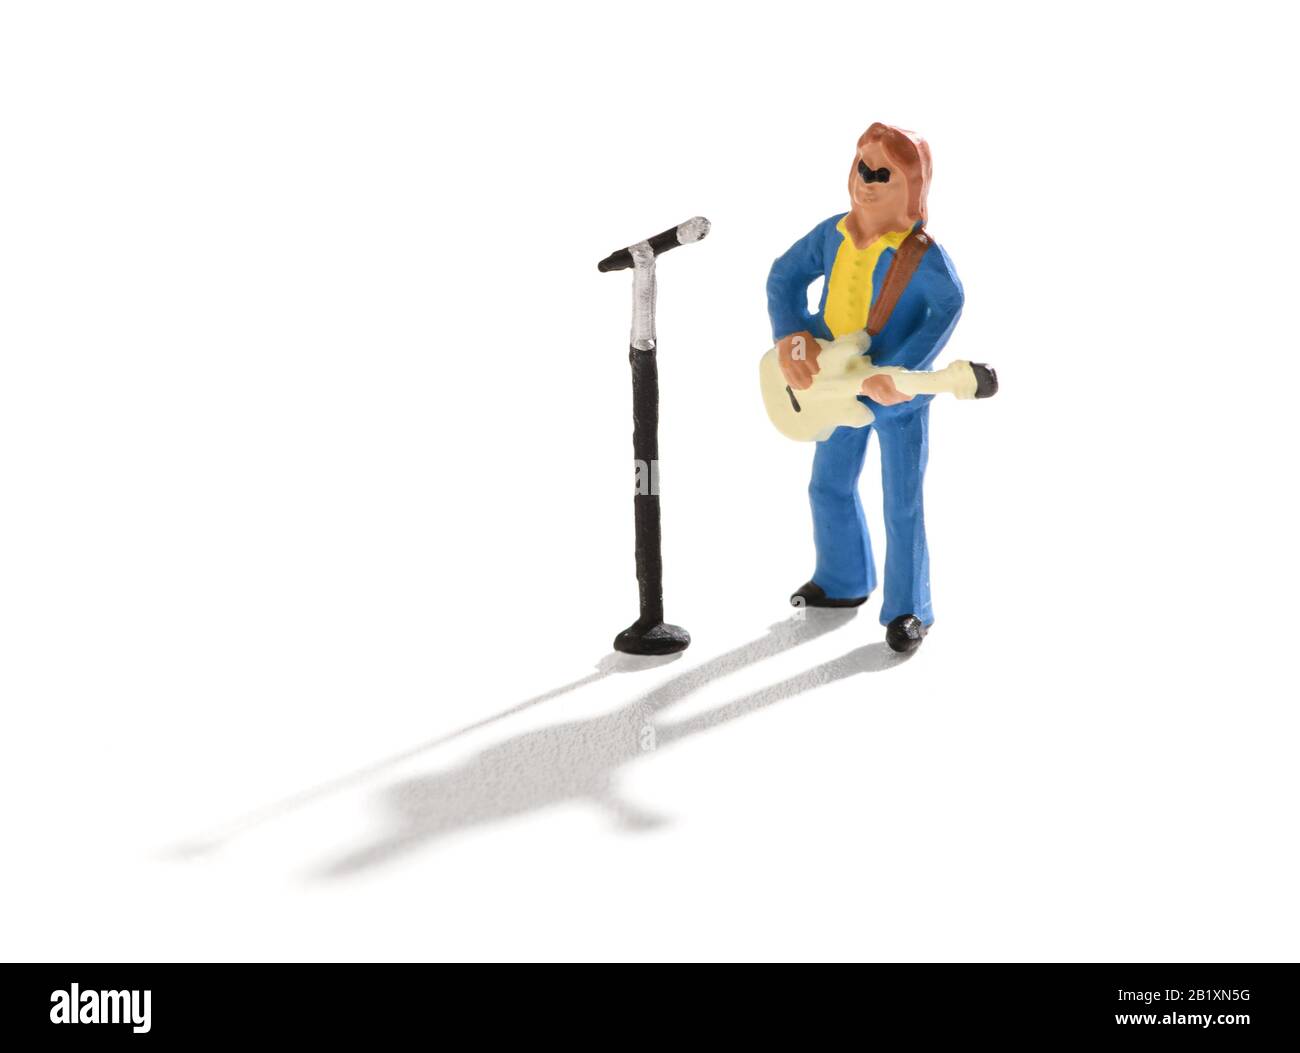 Miniature guitarist and vocalist standing in front of a mike singing during a live performance on white with shadow Stock Photo